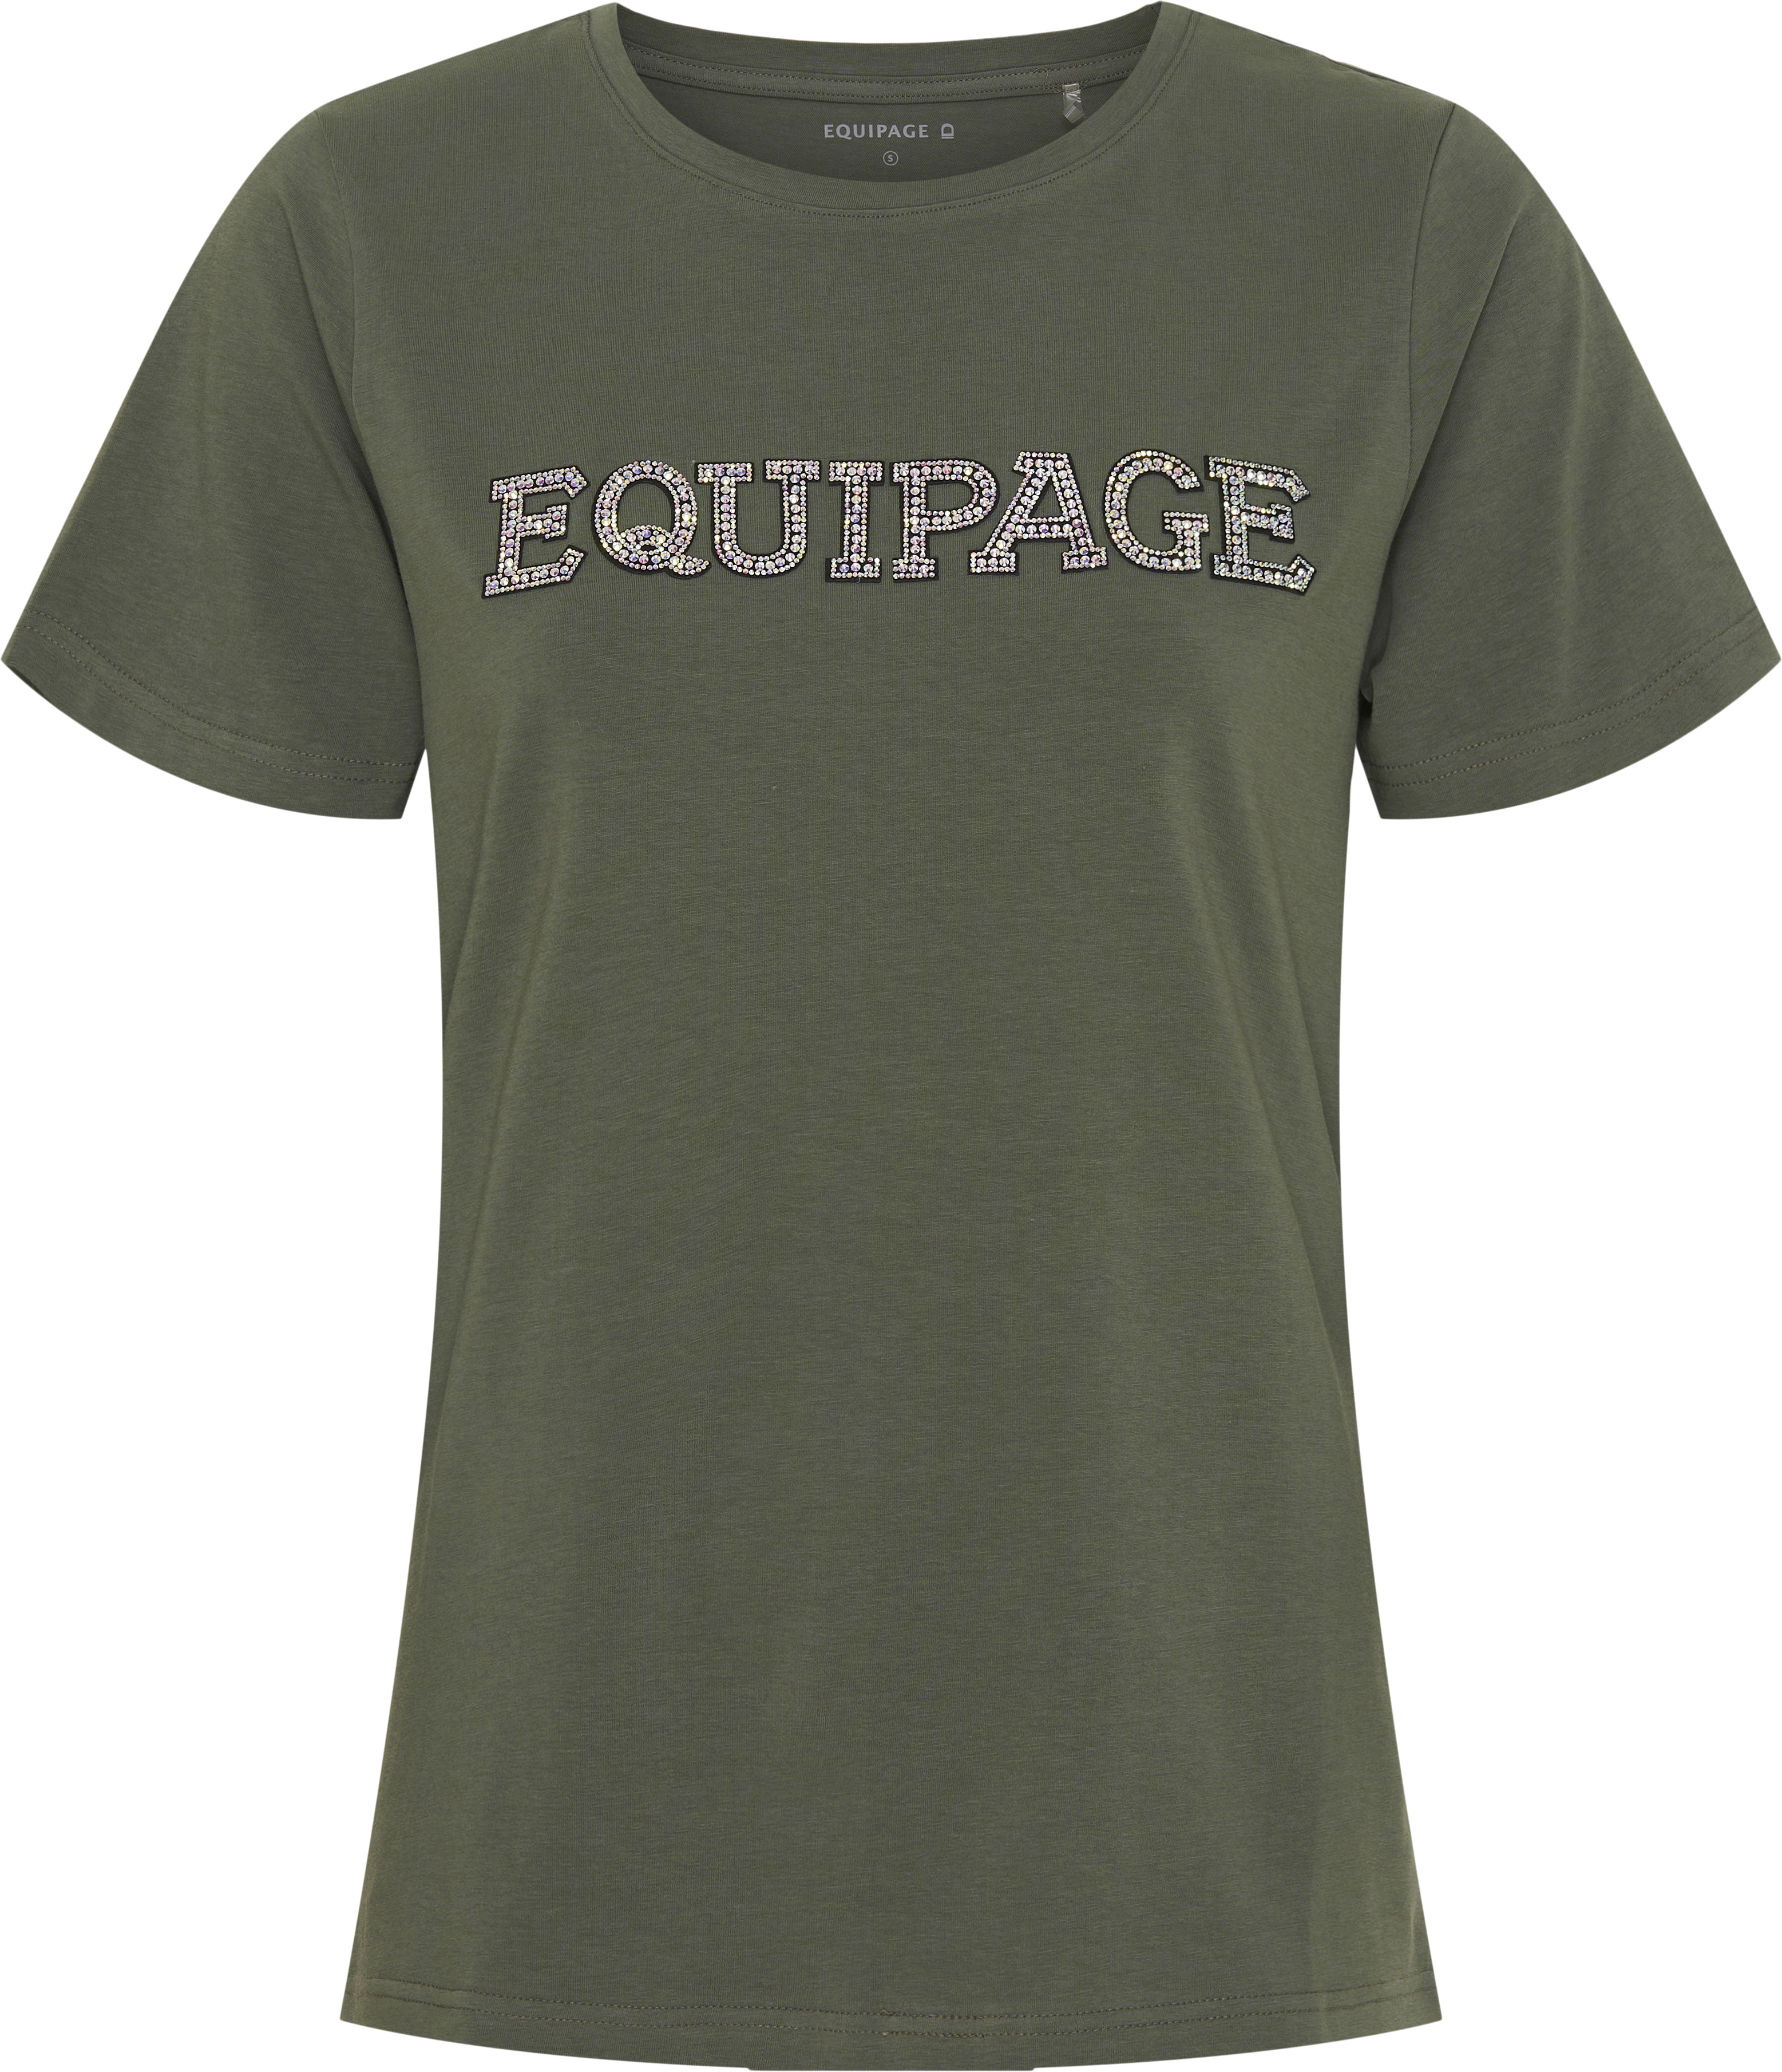 Equipage Melina T-Shirt - Forest (M)